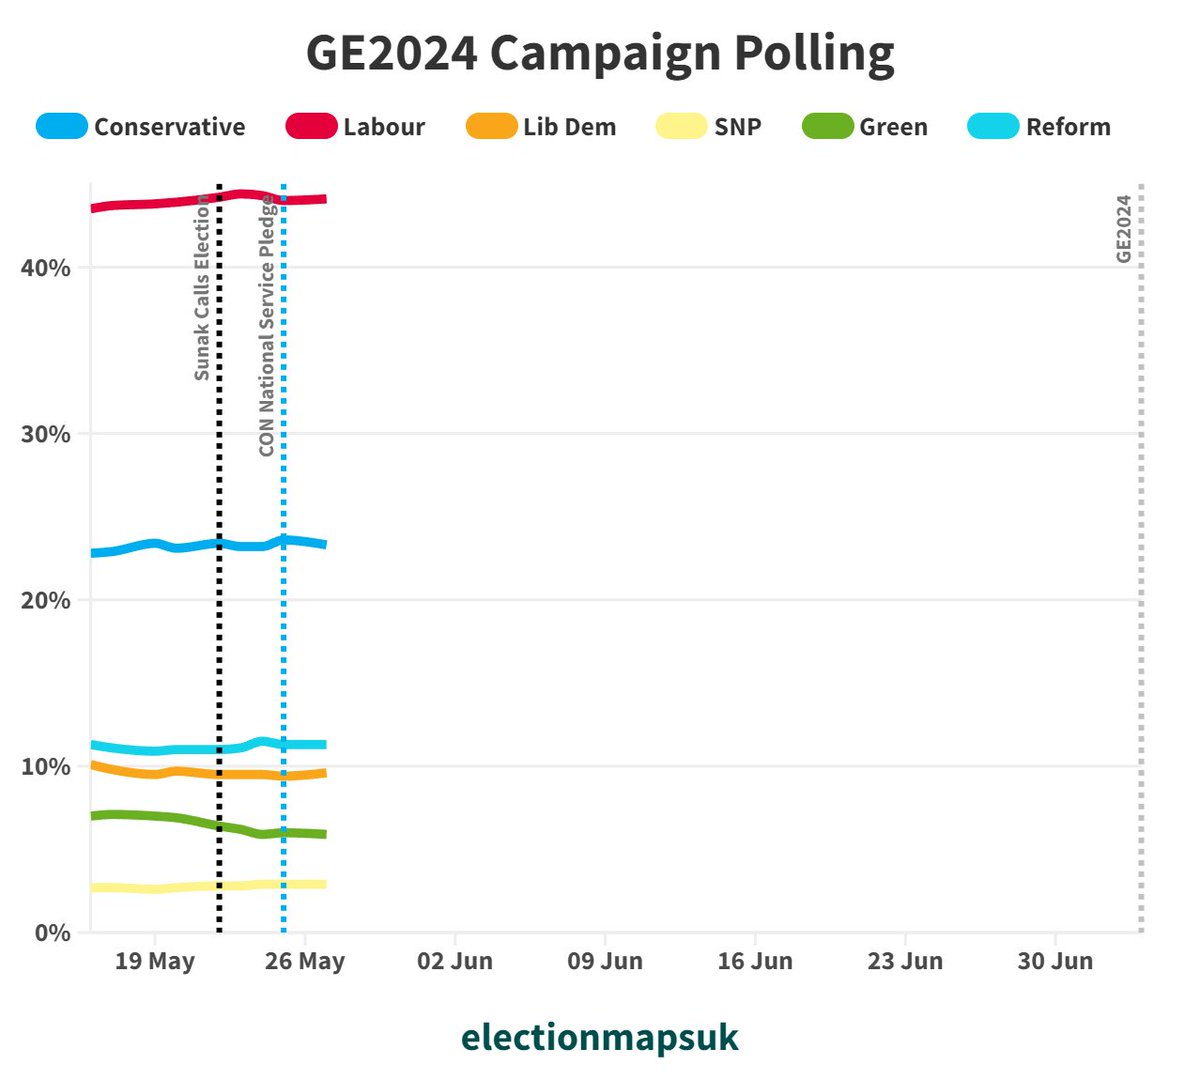 There has been no significant polling movement since Sunak called the election:

LAB: -0.1% to 44.1%
CON: -0.1% to 23.3%
RFM: +0.3% to 11.3%
LDM: +0.1% to 9.6%
GRN: -0.5% to 5.9%
SNP: +0.1% to 2.9%